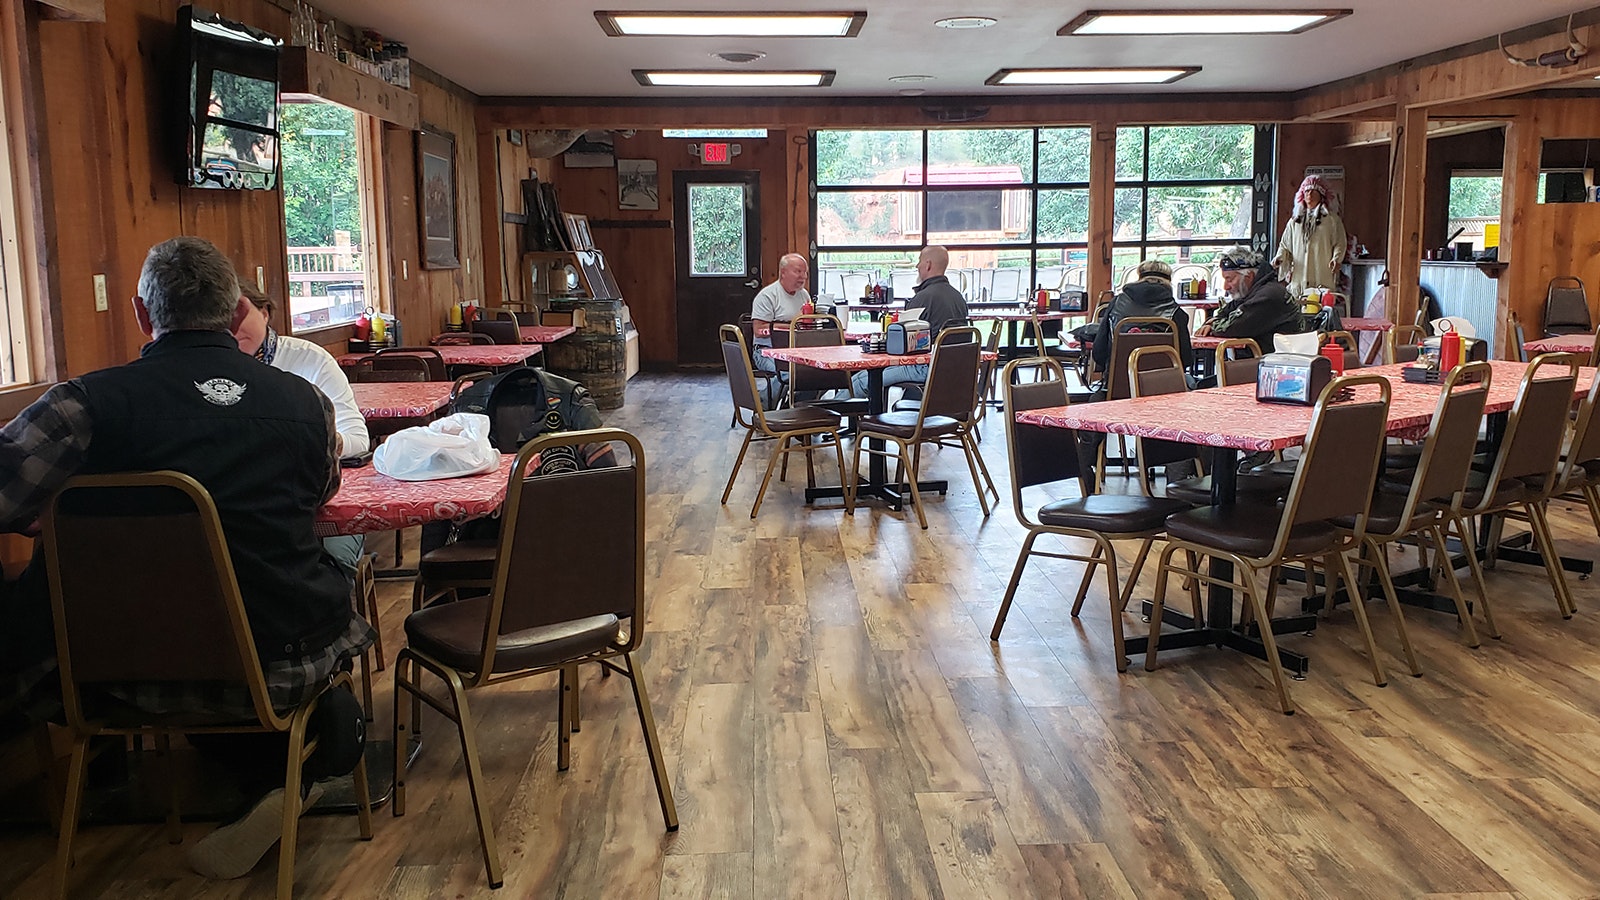 The cafe at the KOA campground serves breakfast, lunch and dinner.